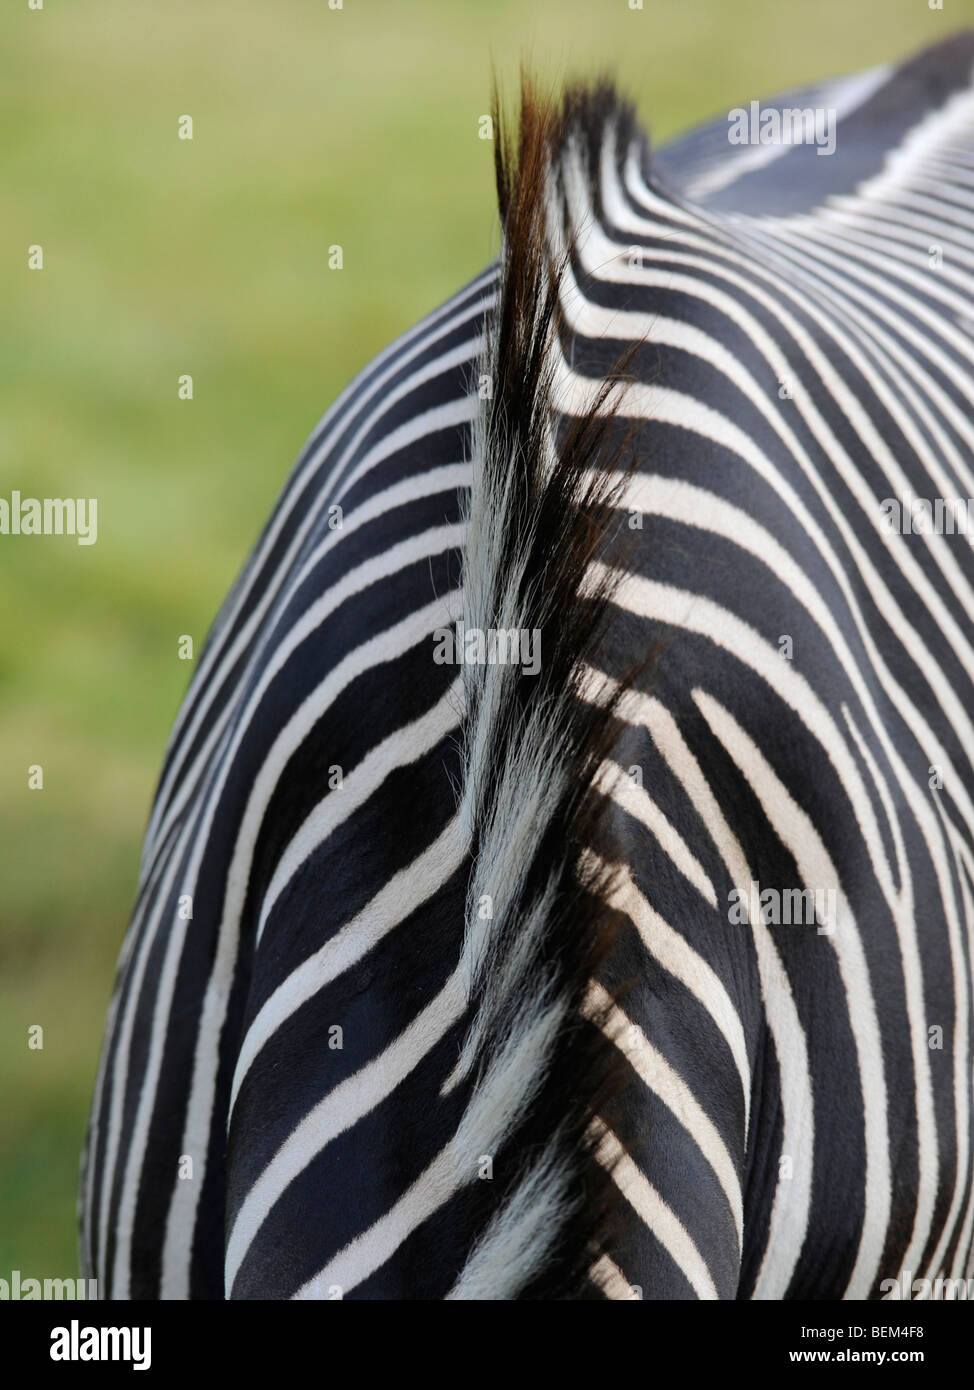 The coat of a zebra with a striped mane. Stock Photo